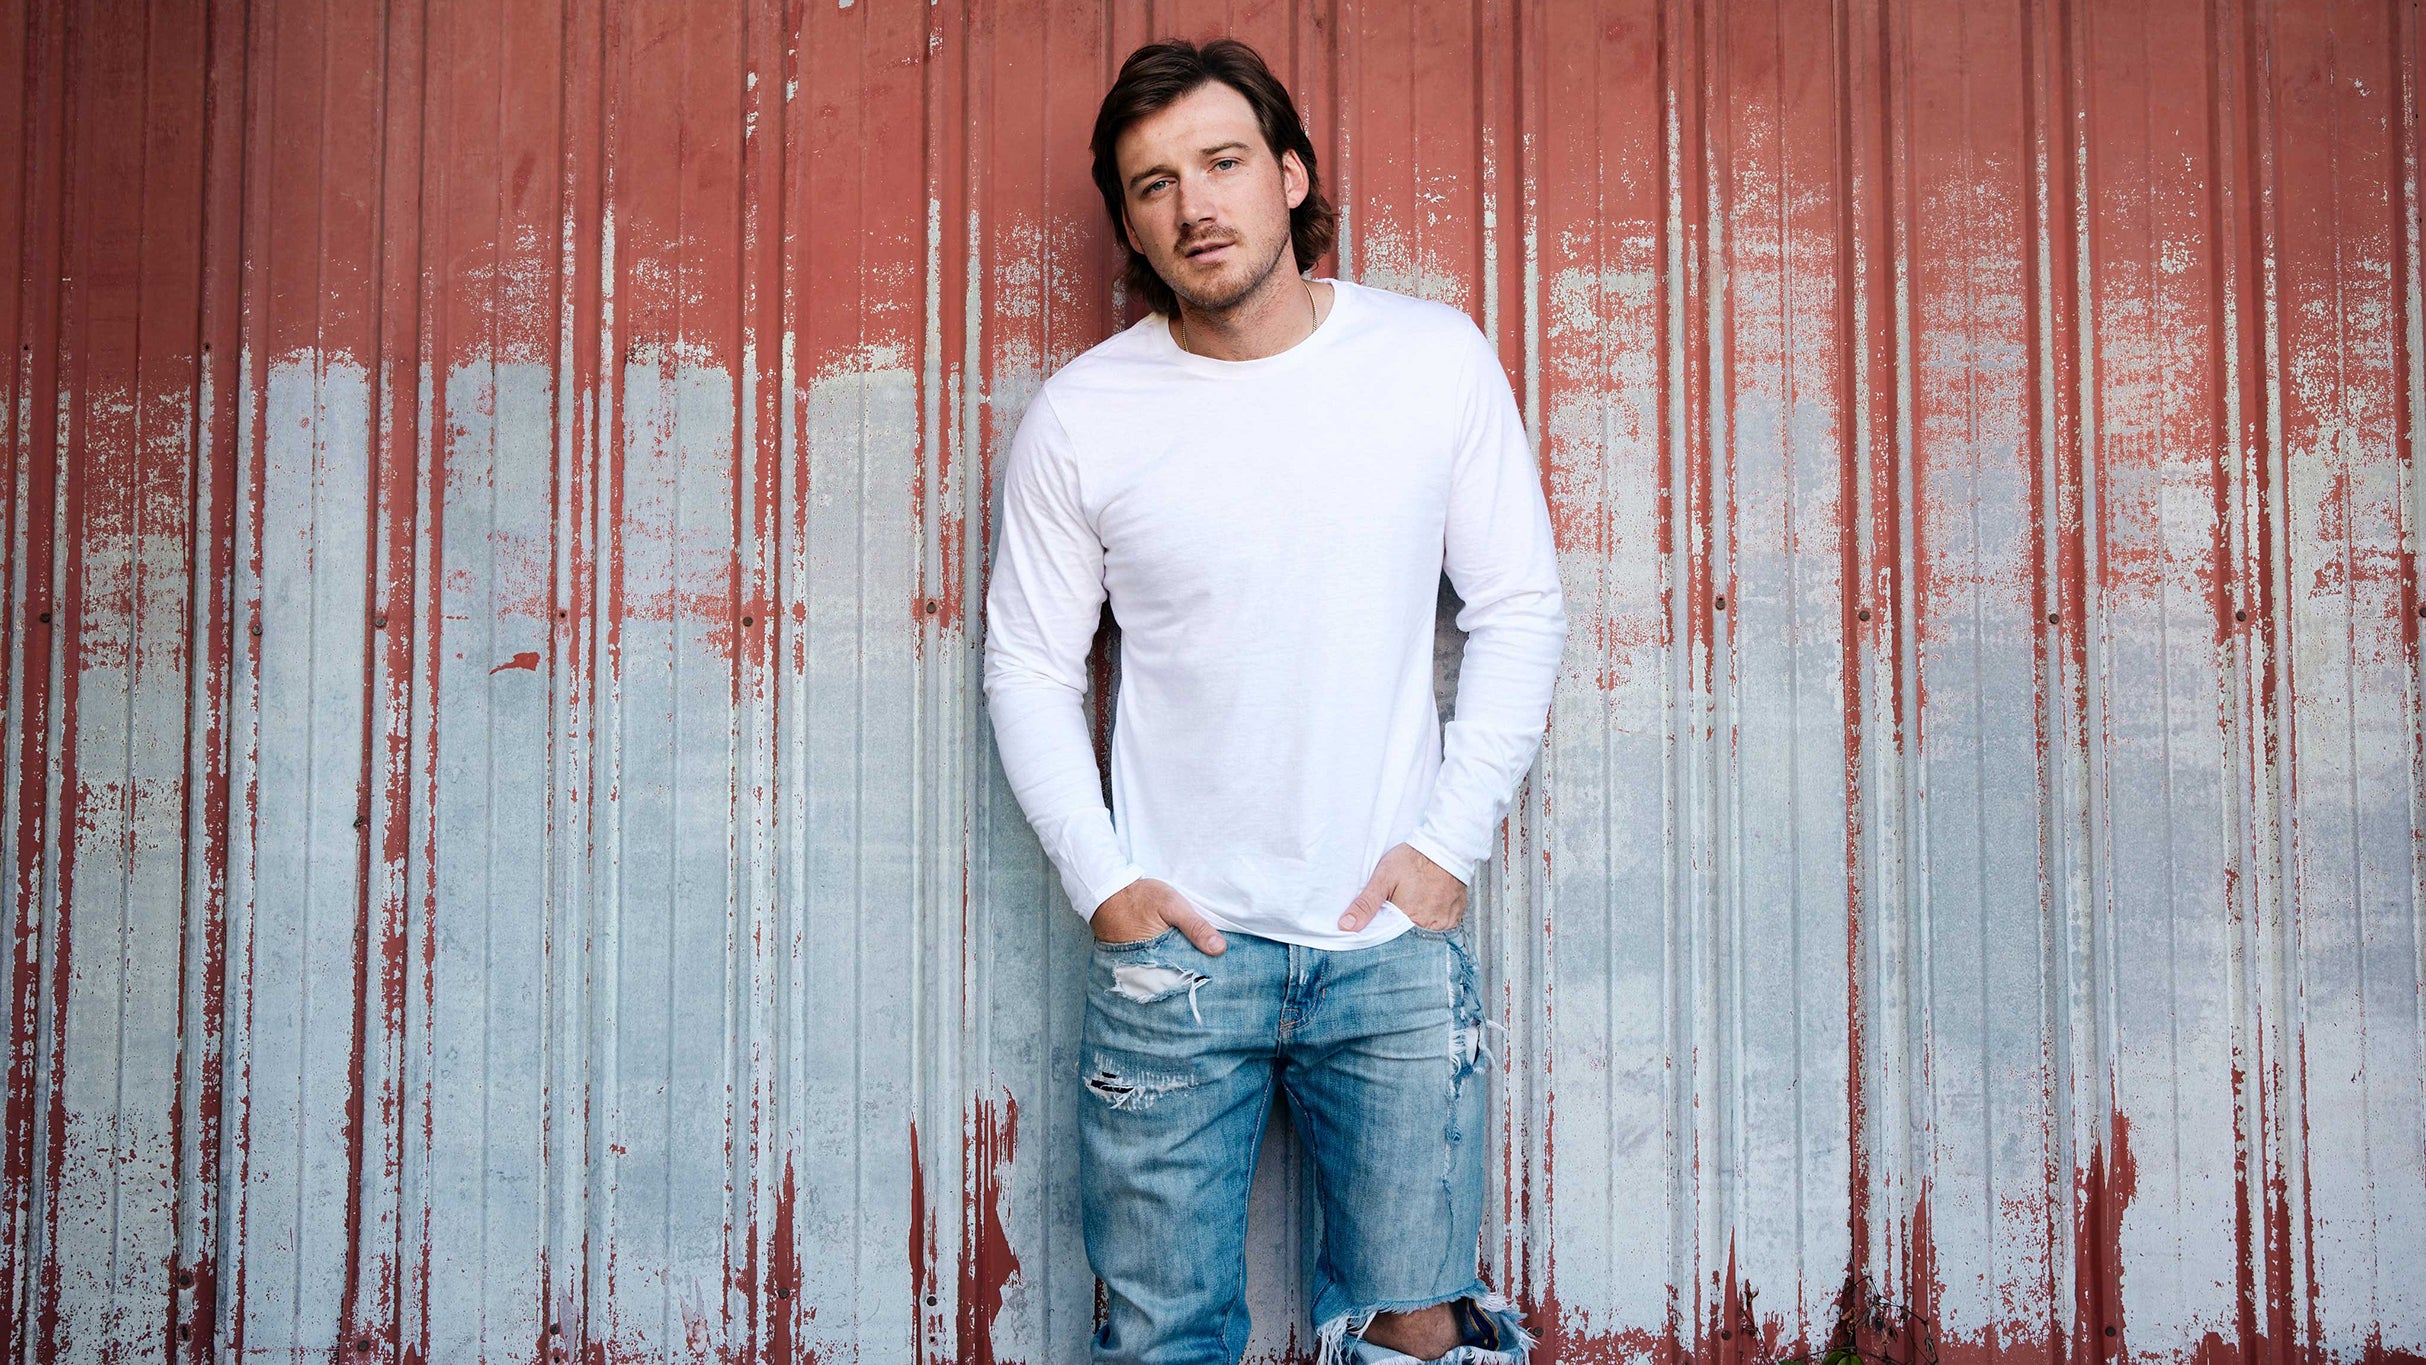 Morgan Wallen: One Night At A Time World Tour in Washington promo photo for Parker McCollum Fan Club presale offer code